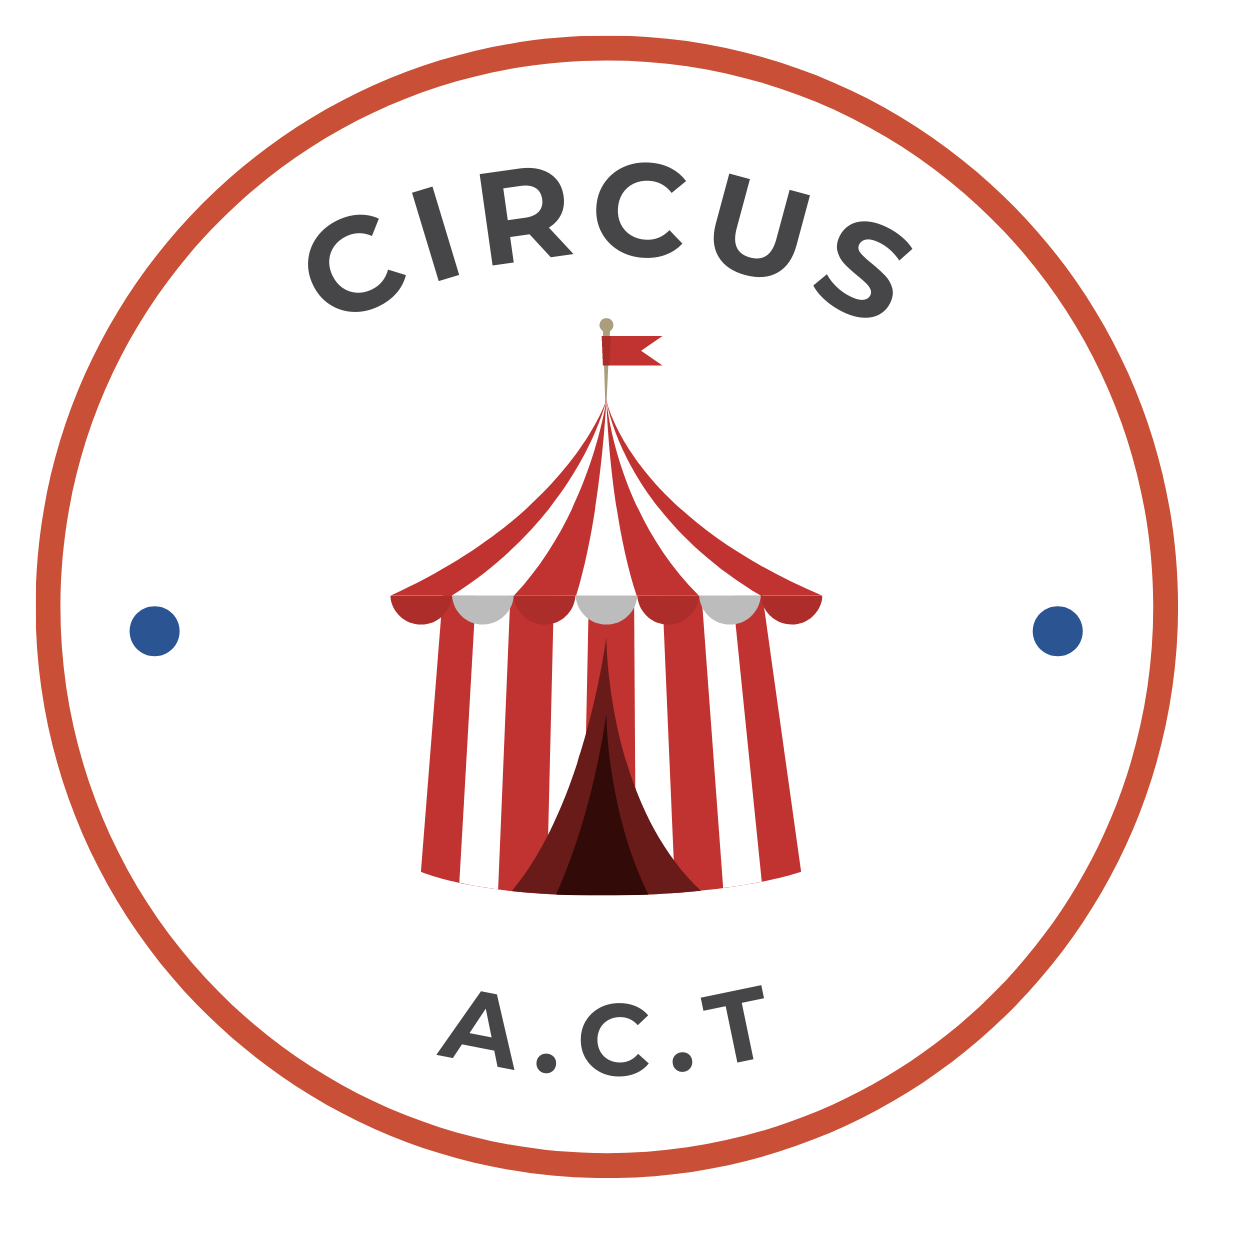 Circus Act eLearning